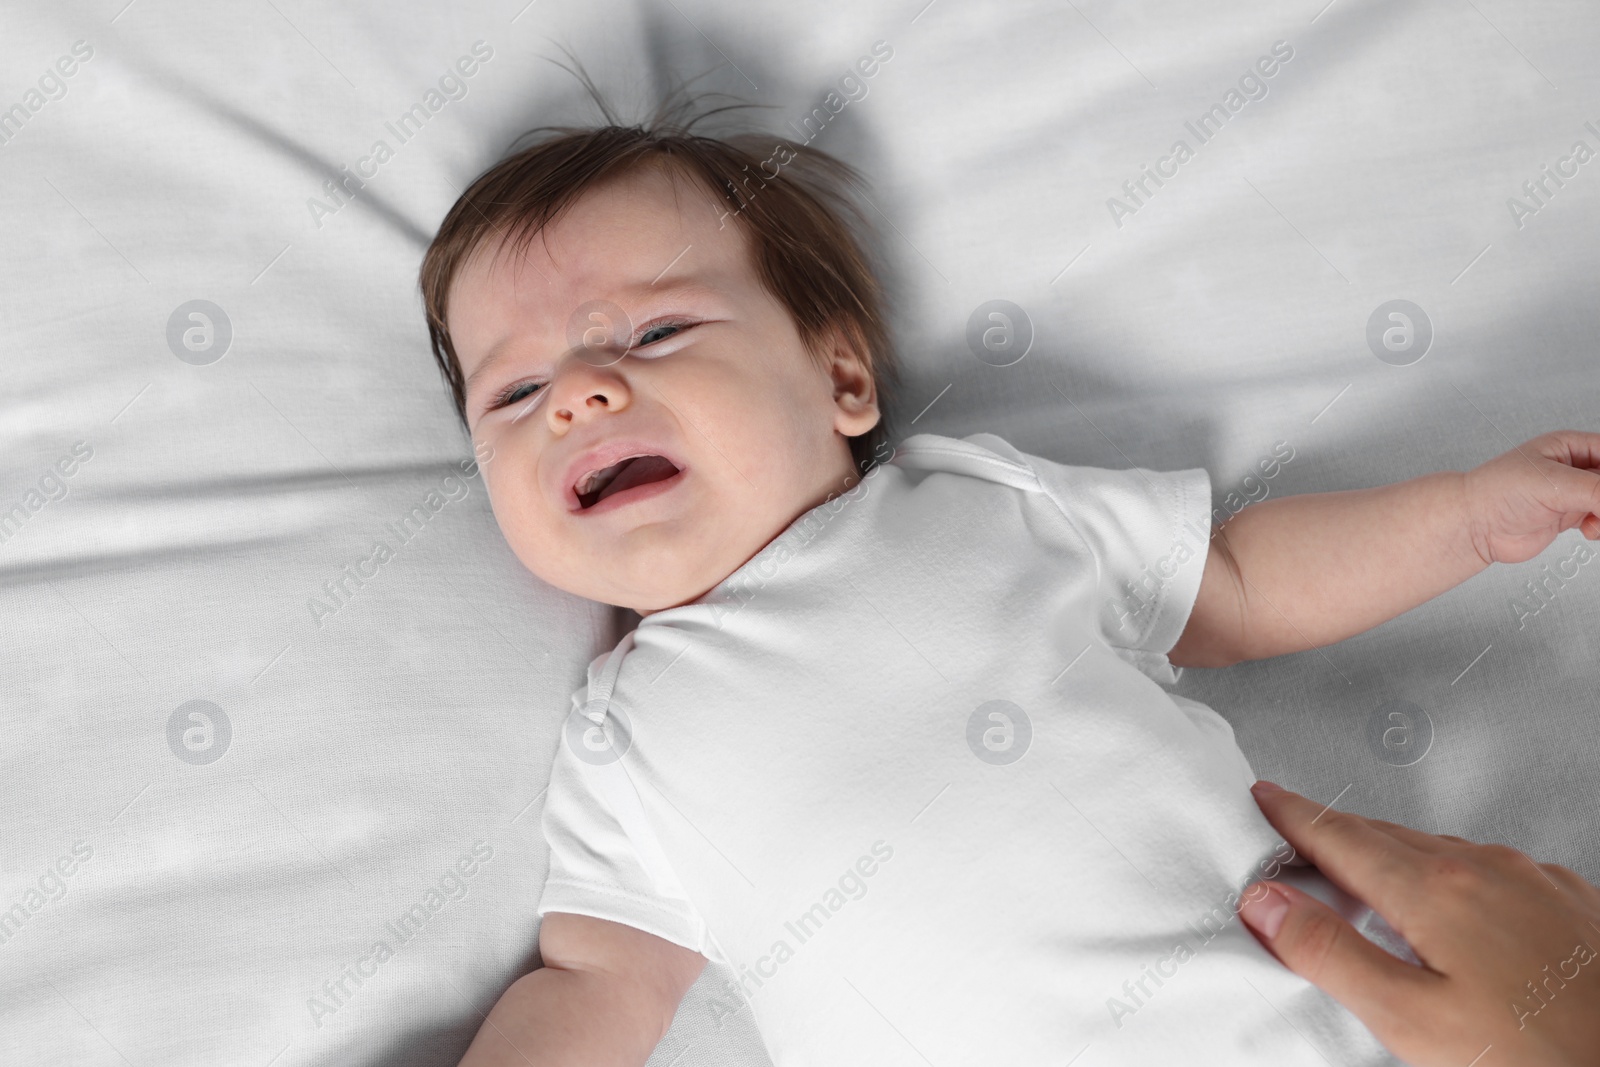 Photo of Cute little baby crying on bed, closeup